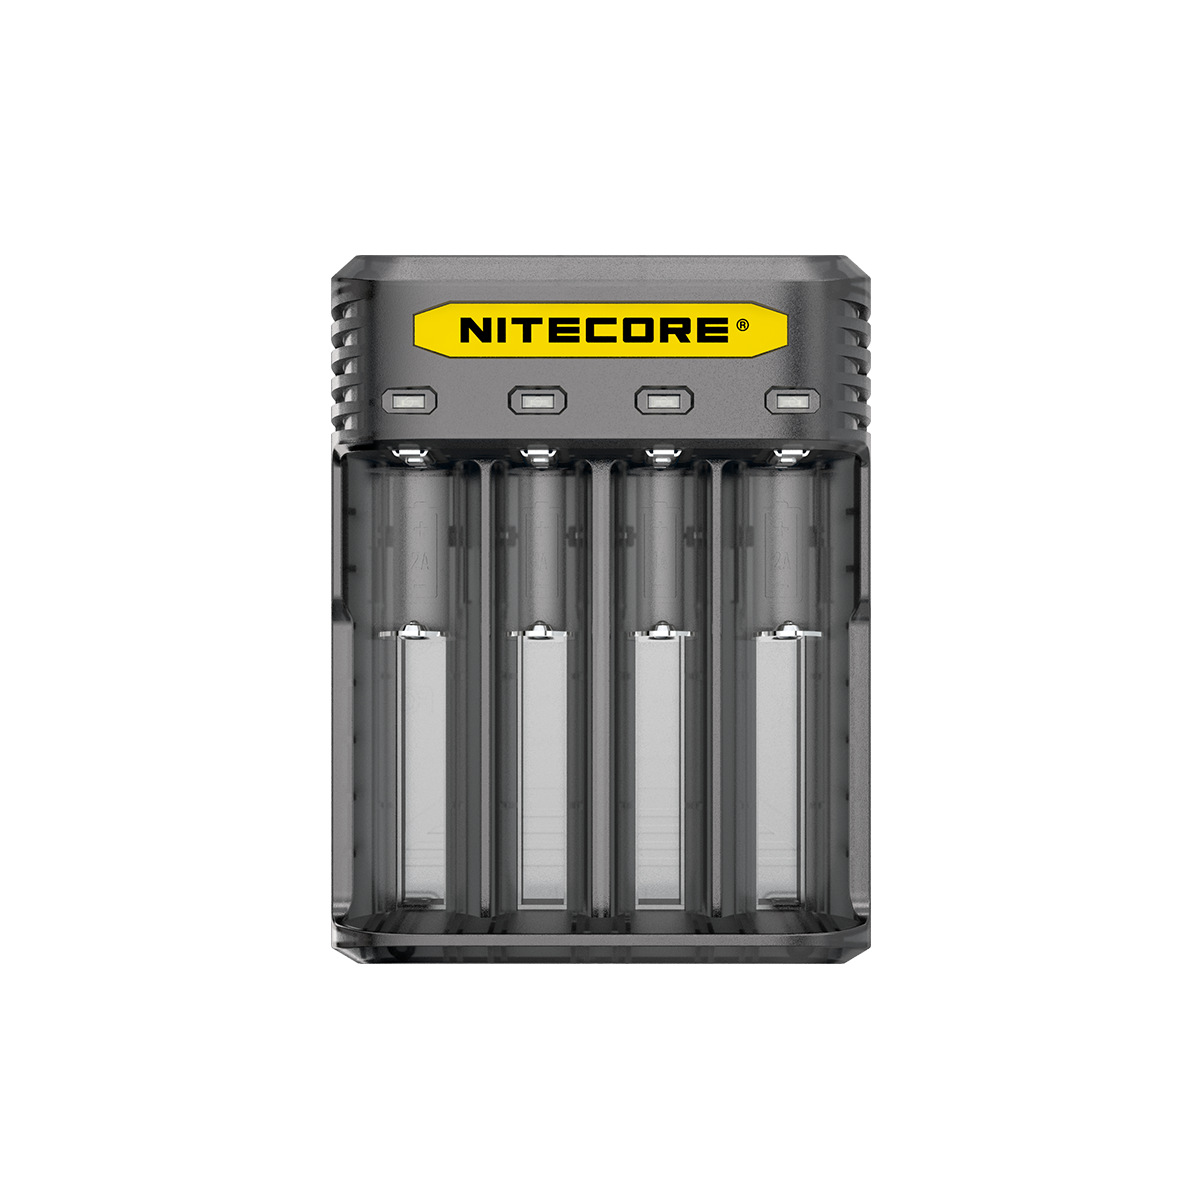 Battery Chargers by Nitecore